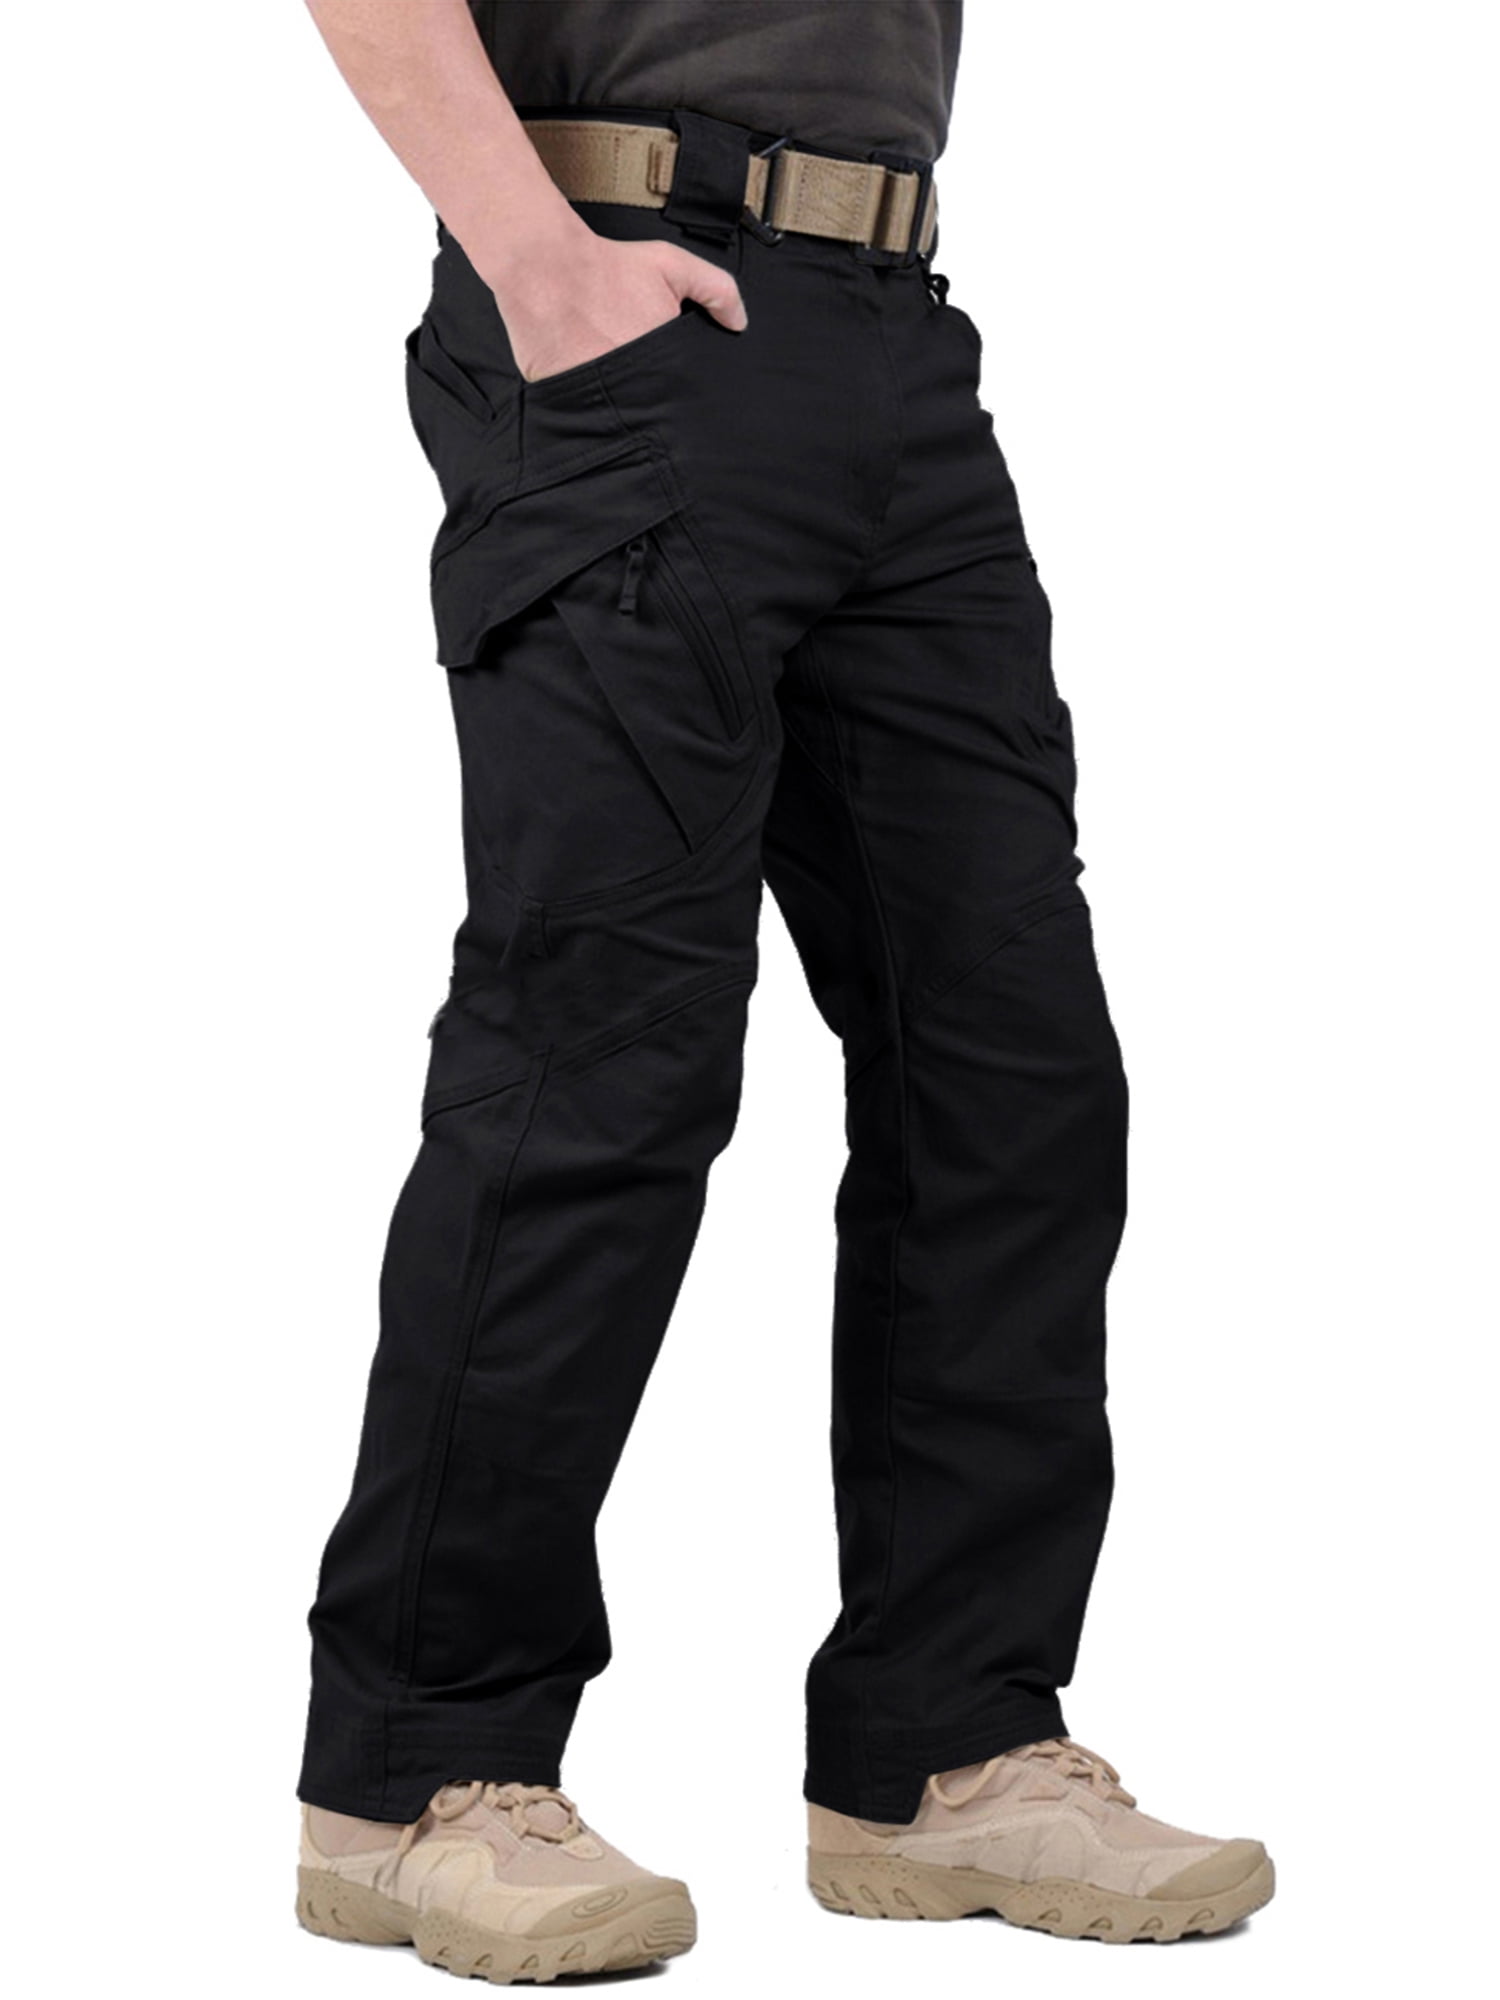 FEDTOSING Relaxed Work Cargo Pants Tactical Mens Pant Black,Size 34×30 ...